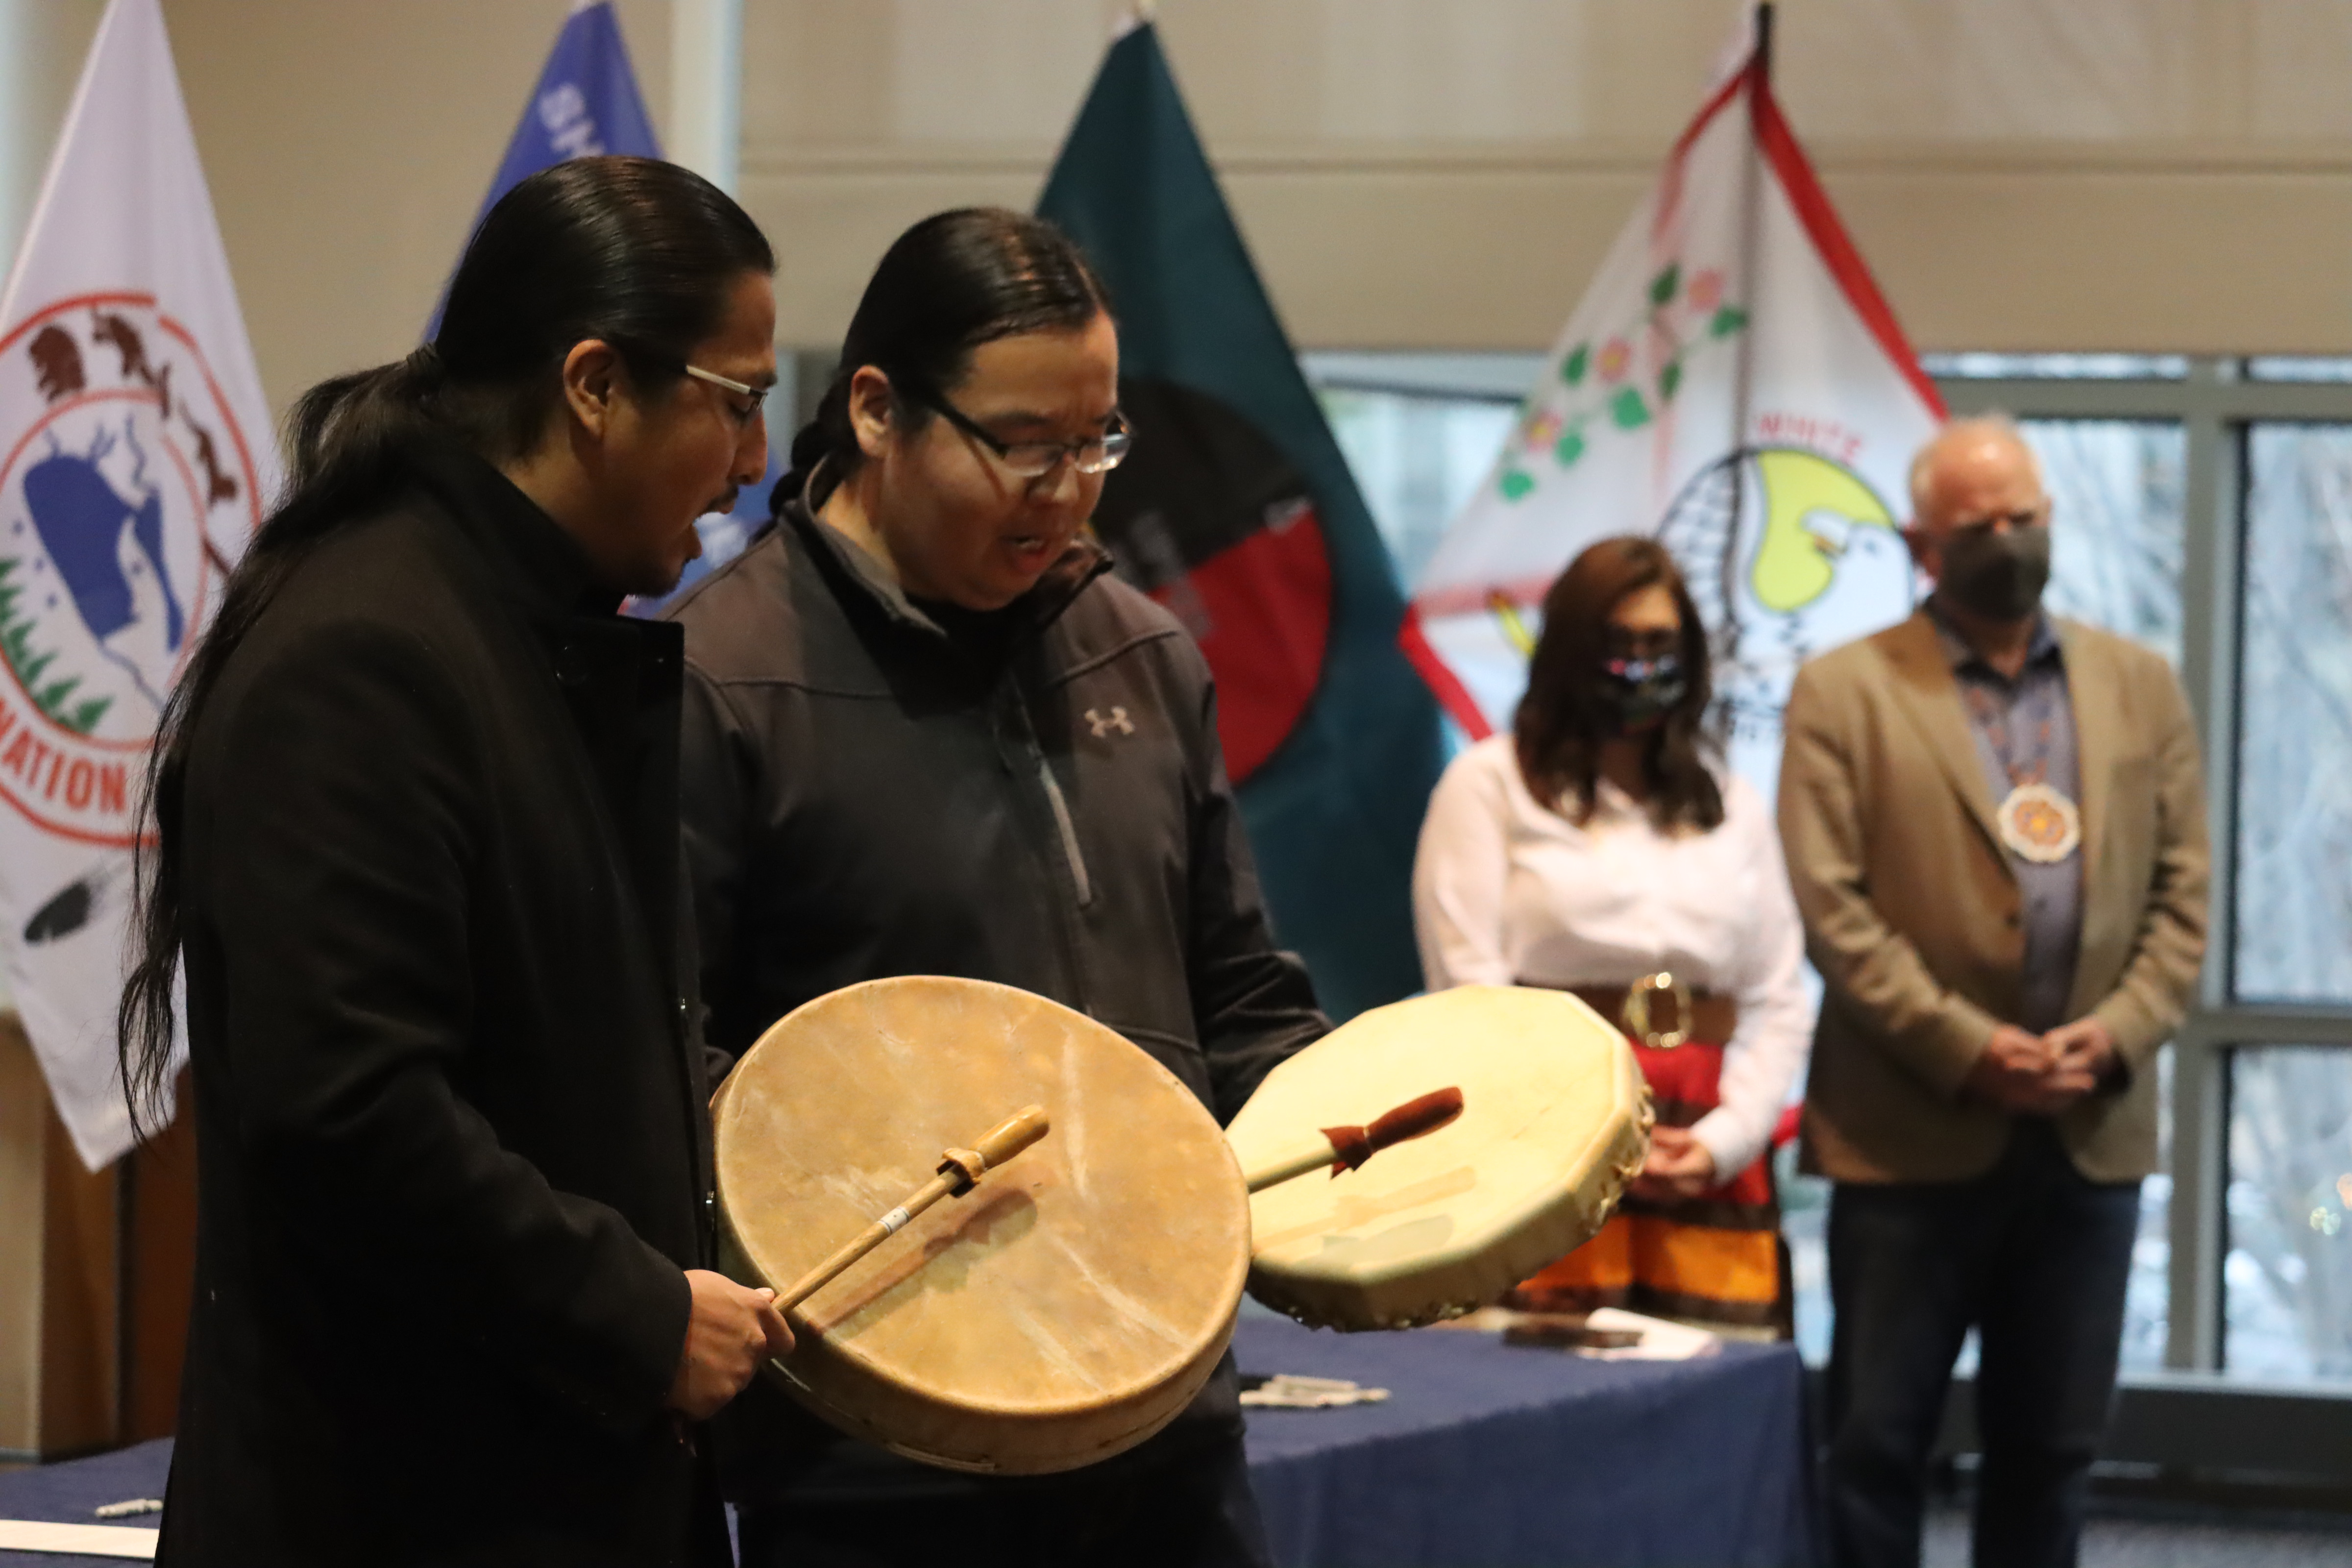 Wakinyan and Thorne LaPointe being the bill signing ceremony at the Minnesota Department of Revenue Building with Tribal leaders on Monday, November 8, 2021. (Photo/Darren Thompson)